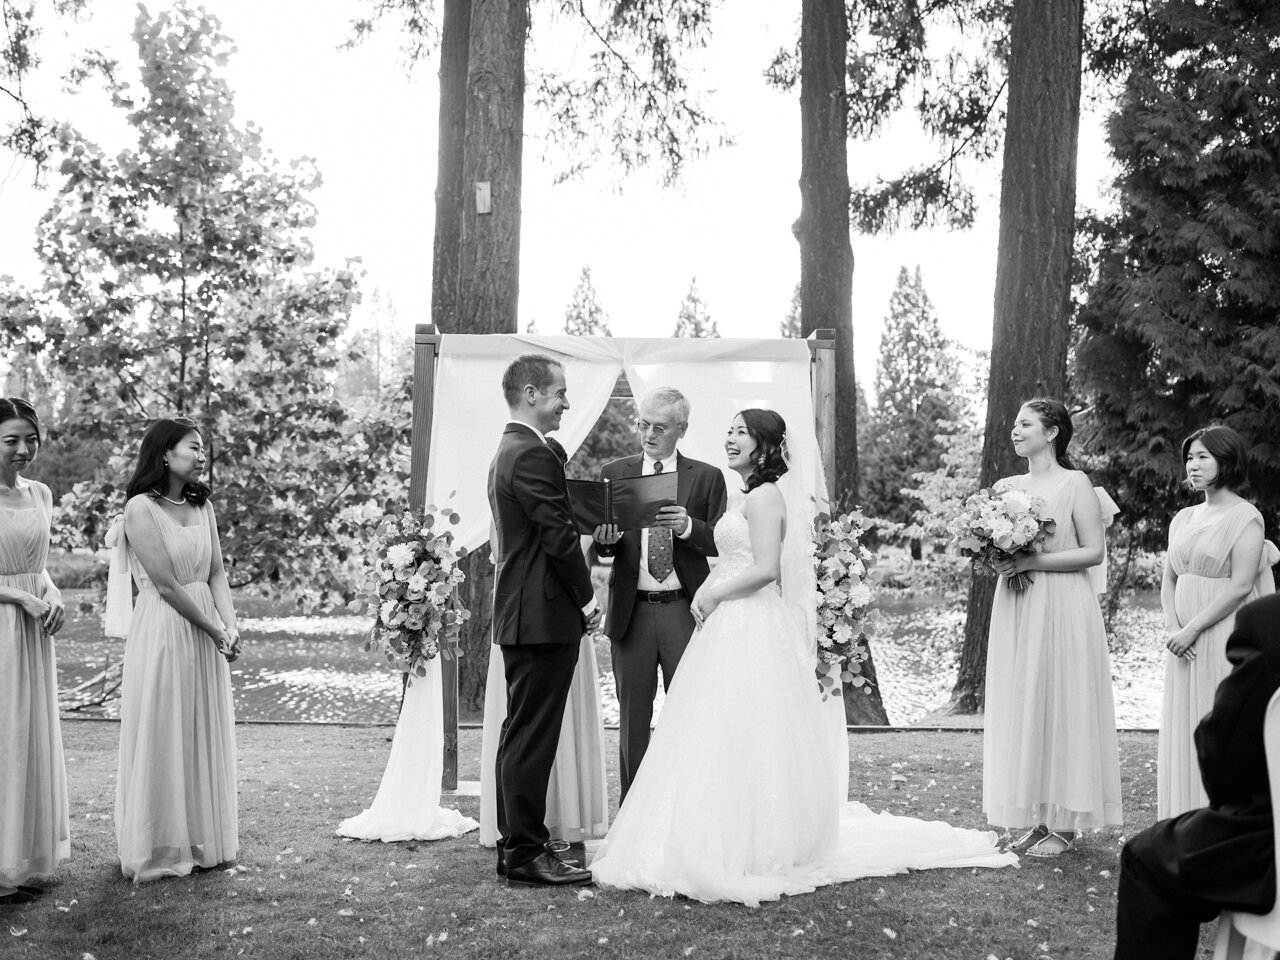  Bride laughs in wedding ceremony in candid black and white moment 